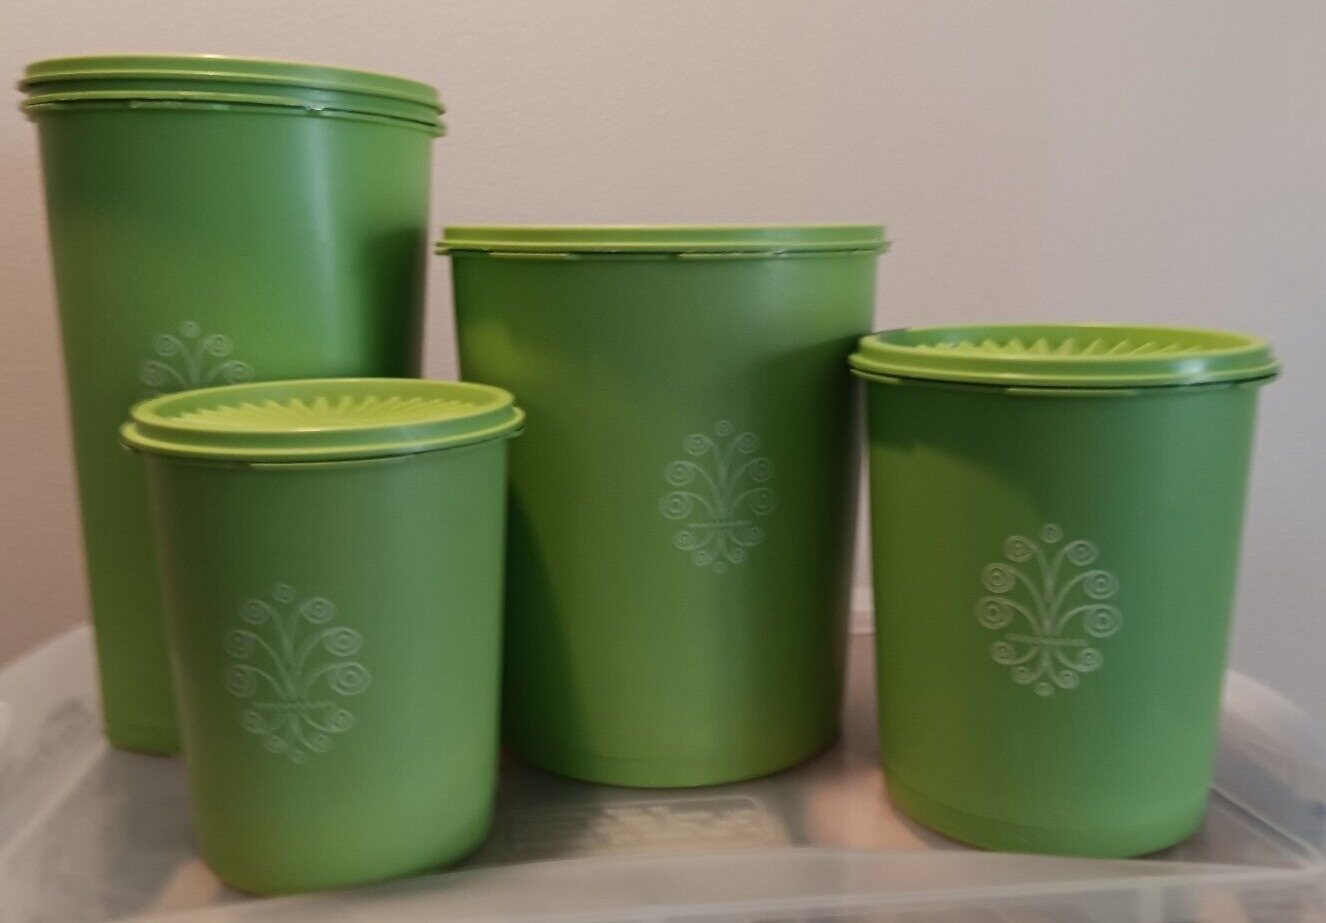 Vintage Tupperware Canisters Apple Green Atomic Burst Set of 4 with 5 lids